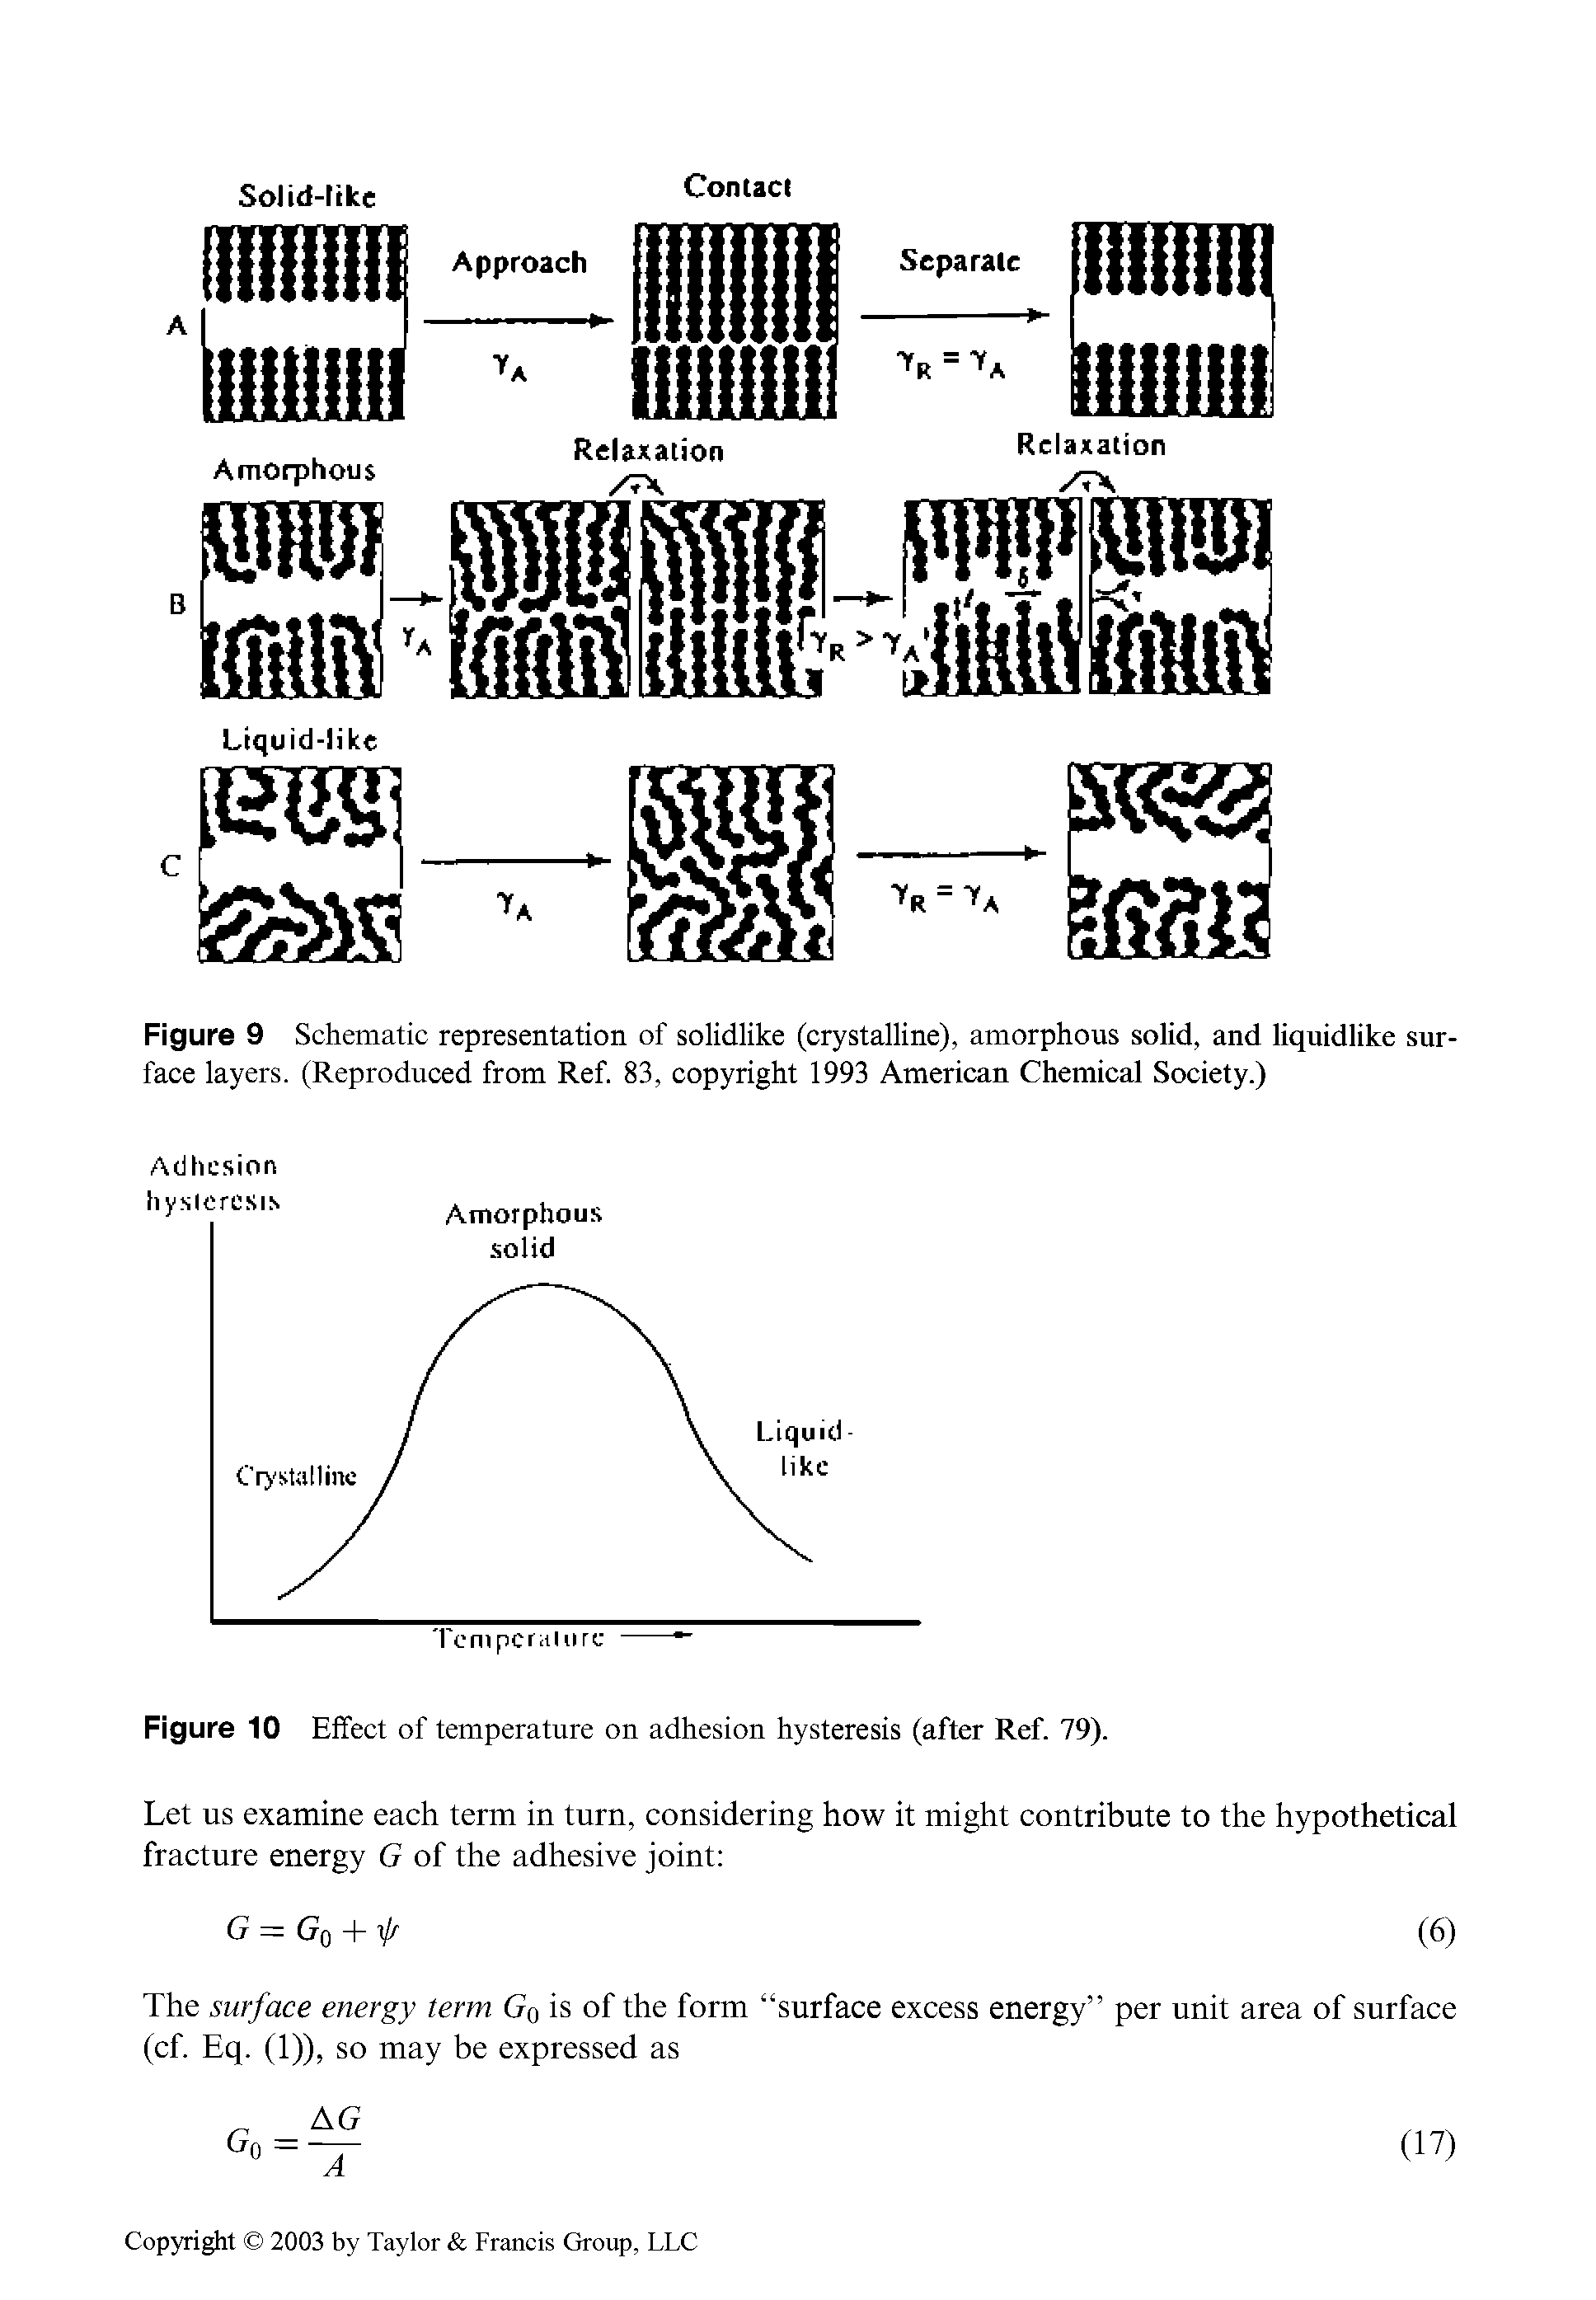 Figure 10 Effect of temperature on adhesion hysteresis (after Ref. 79).